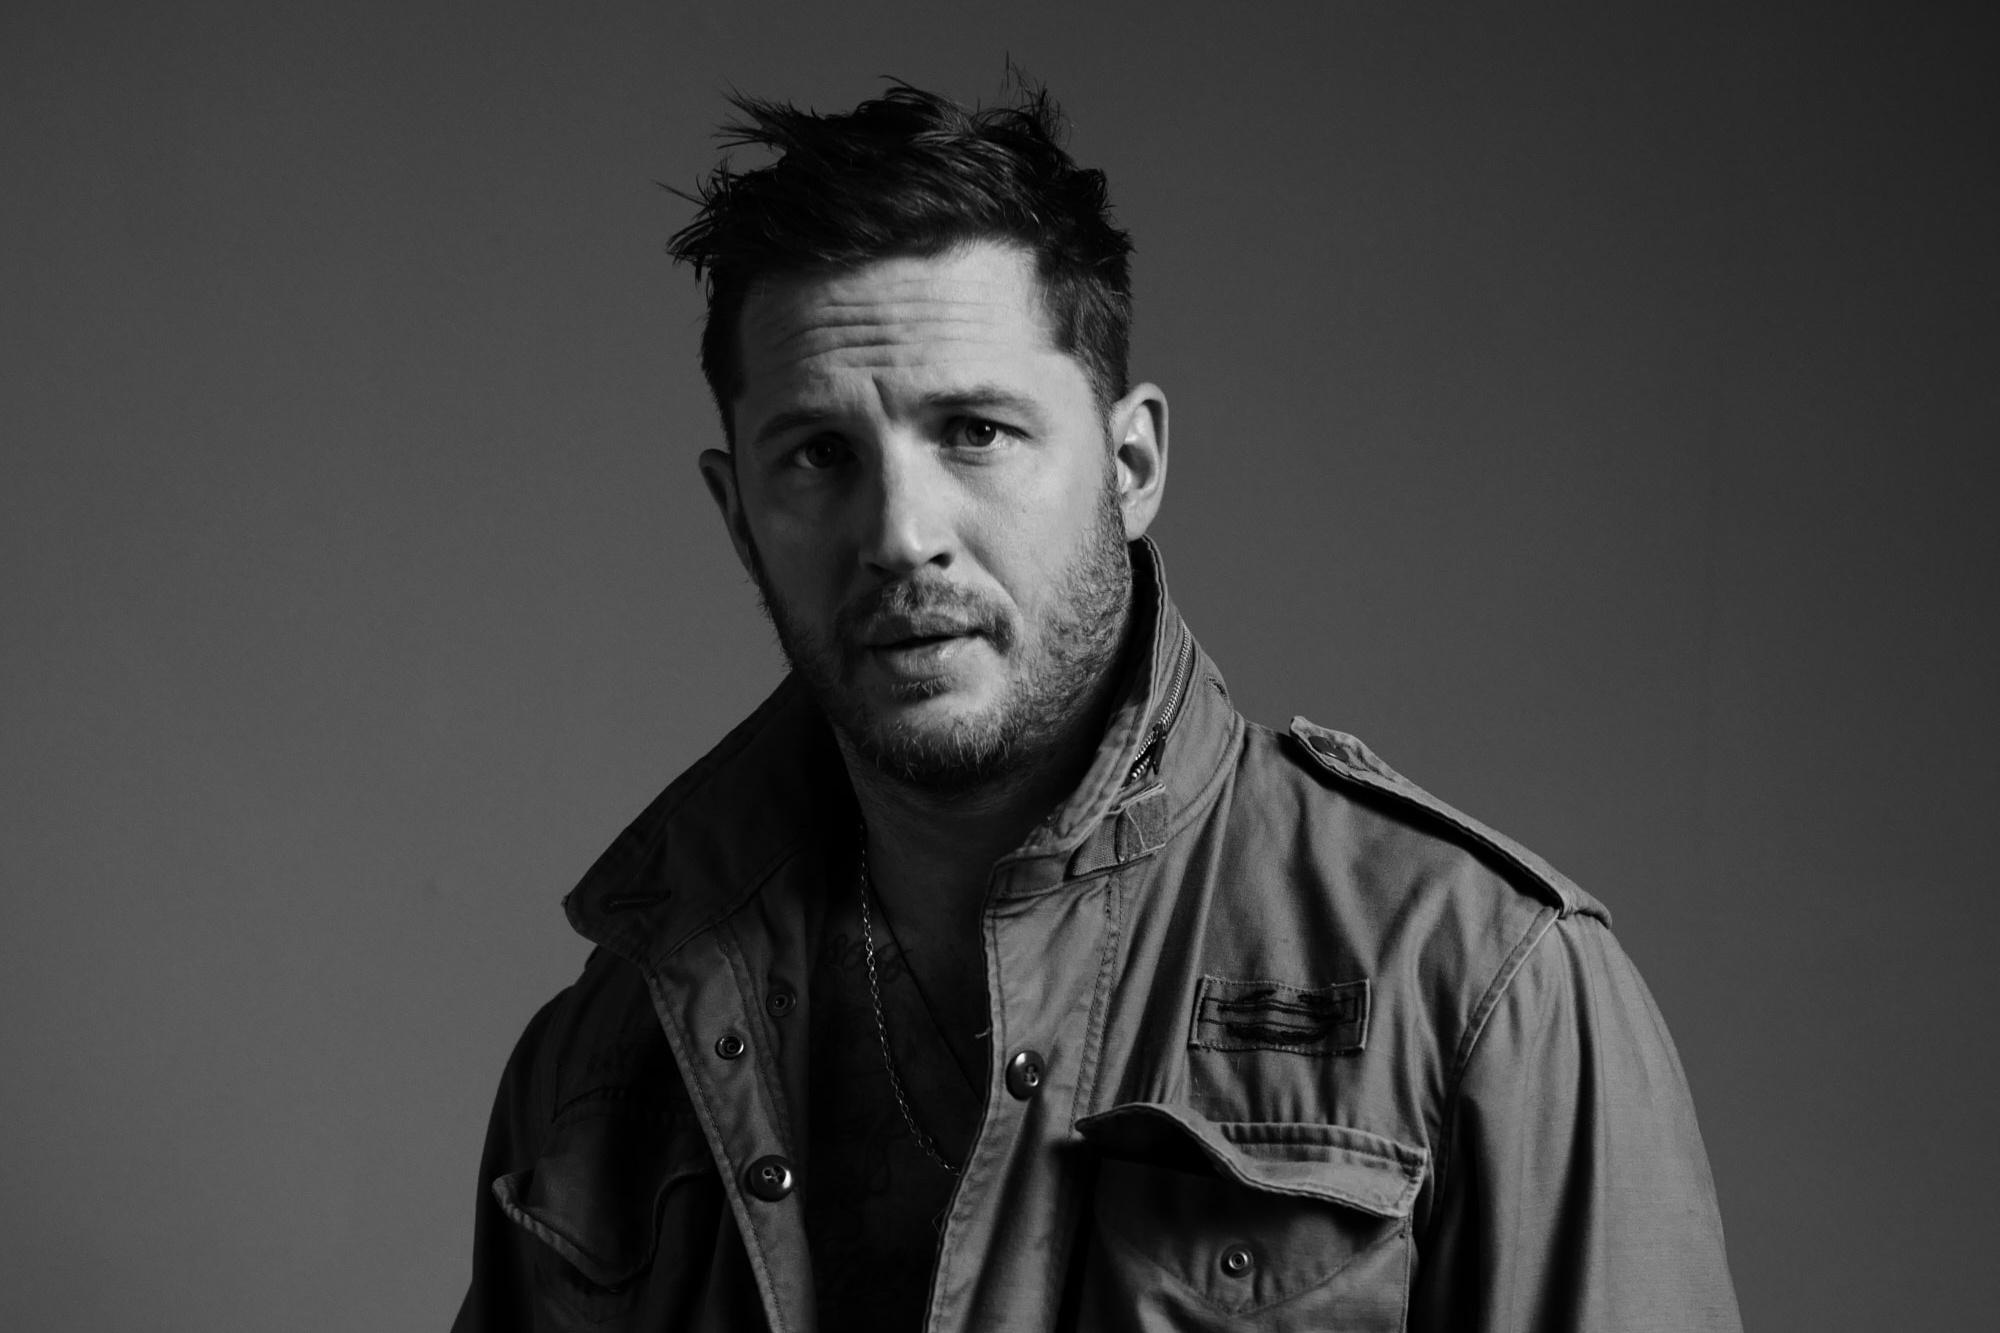 Wallpaper of Actor Black White English Tom Hardy background